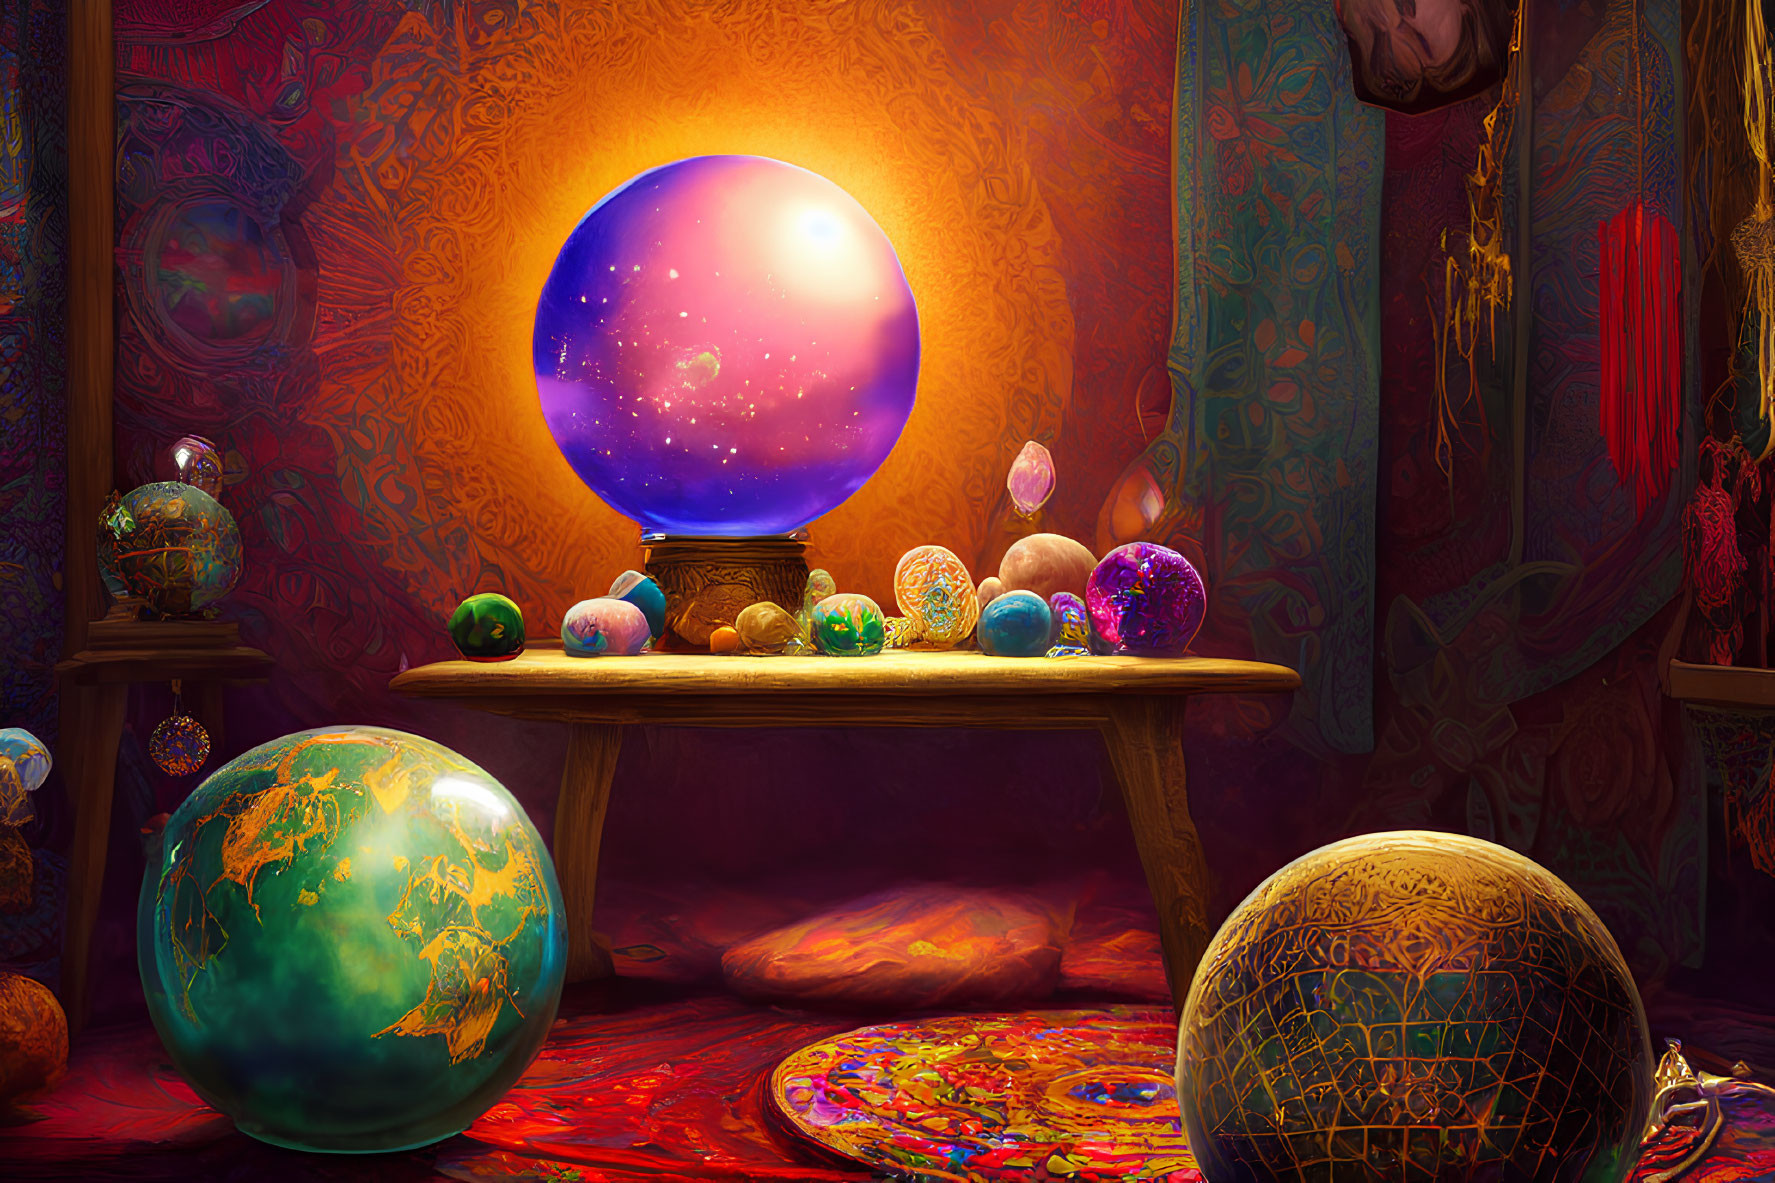 Colorful globes, ornate eggs, and luminous orb in vibrant room